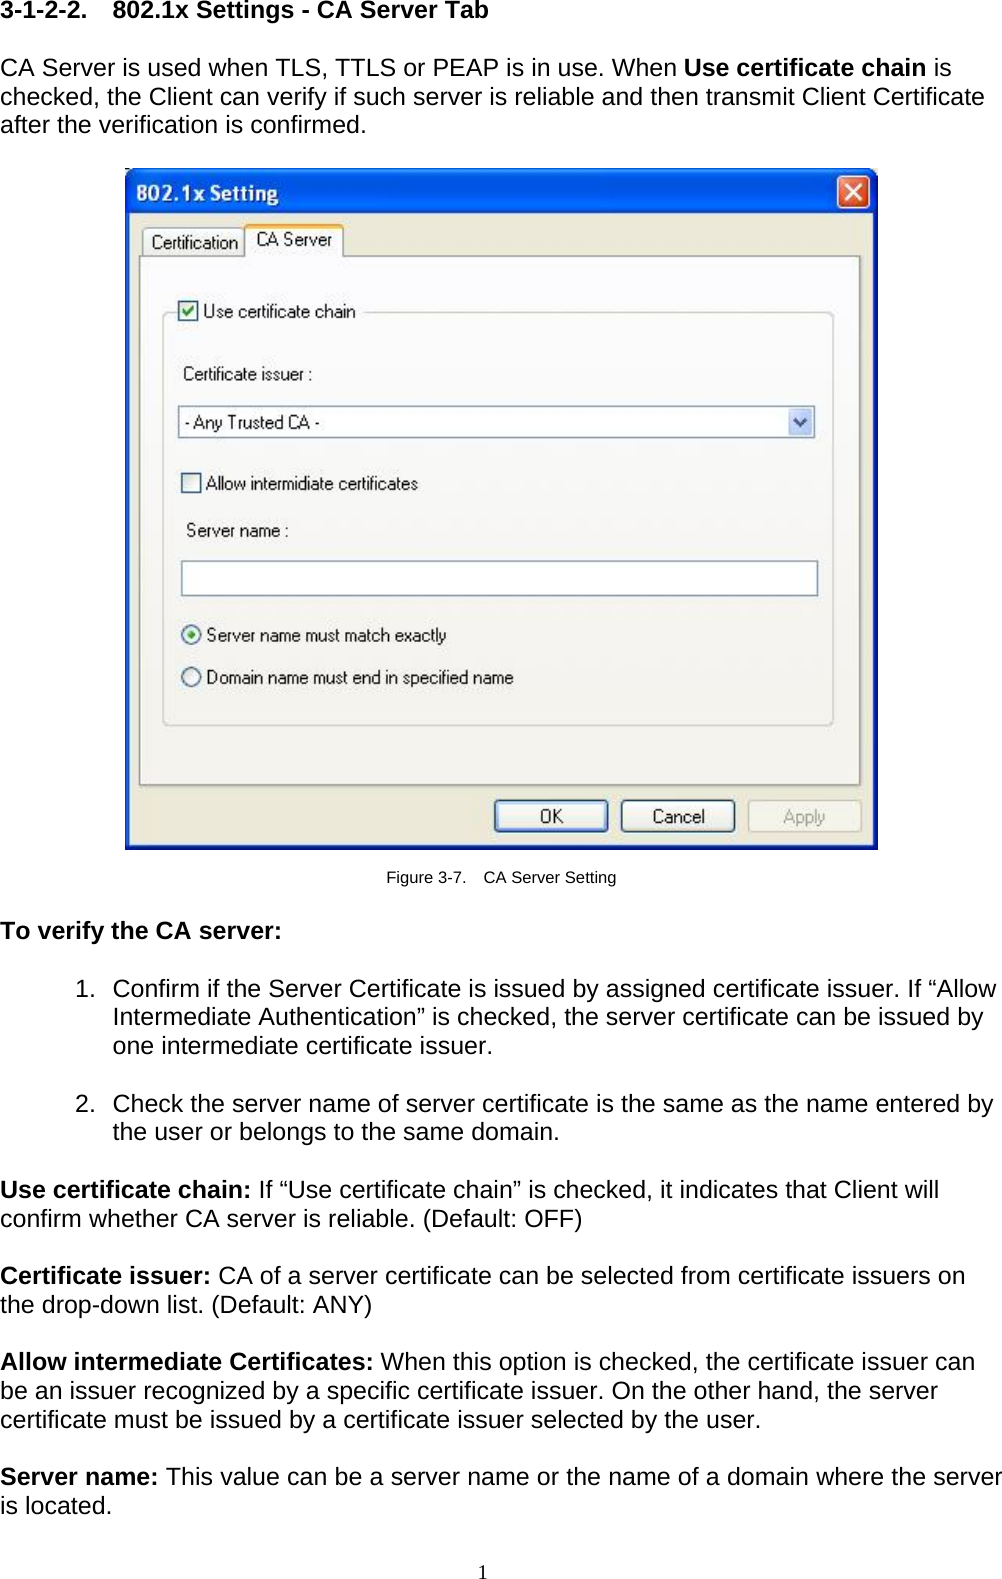 1   3-1-2-2. 802.1x Settings - CA Server Tab  CA Server is used when TLS, TTLS or PEAP is in use. When Use certificate chain is checked, the Client can verify if such server is reliable and then transmit Client Certificate after the verification is confirmed.      Figure 3-7.    CA Server Setting  To verify the CA server:  1.  Confirm if the Server Certificate is issued by assigned certificate issuer. If “Allow Intermediate Authentication” is checked, the server certificate can be issued by one intermediate certificate issuer.  2.  Check the server name of server certificate is the same as the name entered by the user or belongs to the same domain.  Use certificate chain: If “Use certificate chain” is checked, it indicates that Client will confirm whether CA server is reliable. (Default: OFF)  Certificate issuer: CA of a server certificate can be selected from certificate issuers on the drop-down list. (Default: ANY)  Allow intermediate Certificates: When this option is checked, the certificate issuer can be an issuer recognized by a specific certificate issuer. On the other hand, the server certificate must be issued by a certificate issuer selected by the user.  Server name: This value can be a server name or the name of a domain where the server is located. 